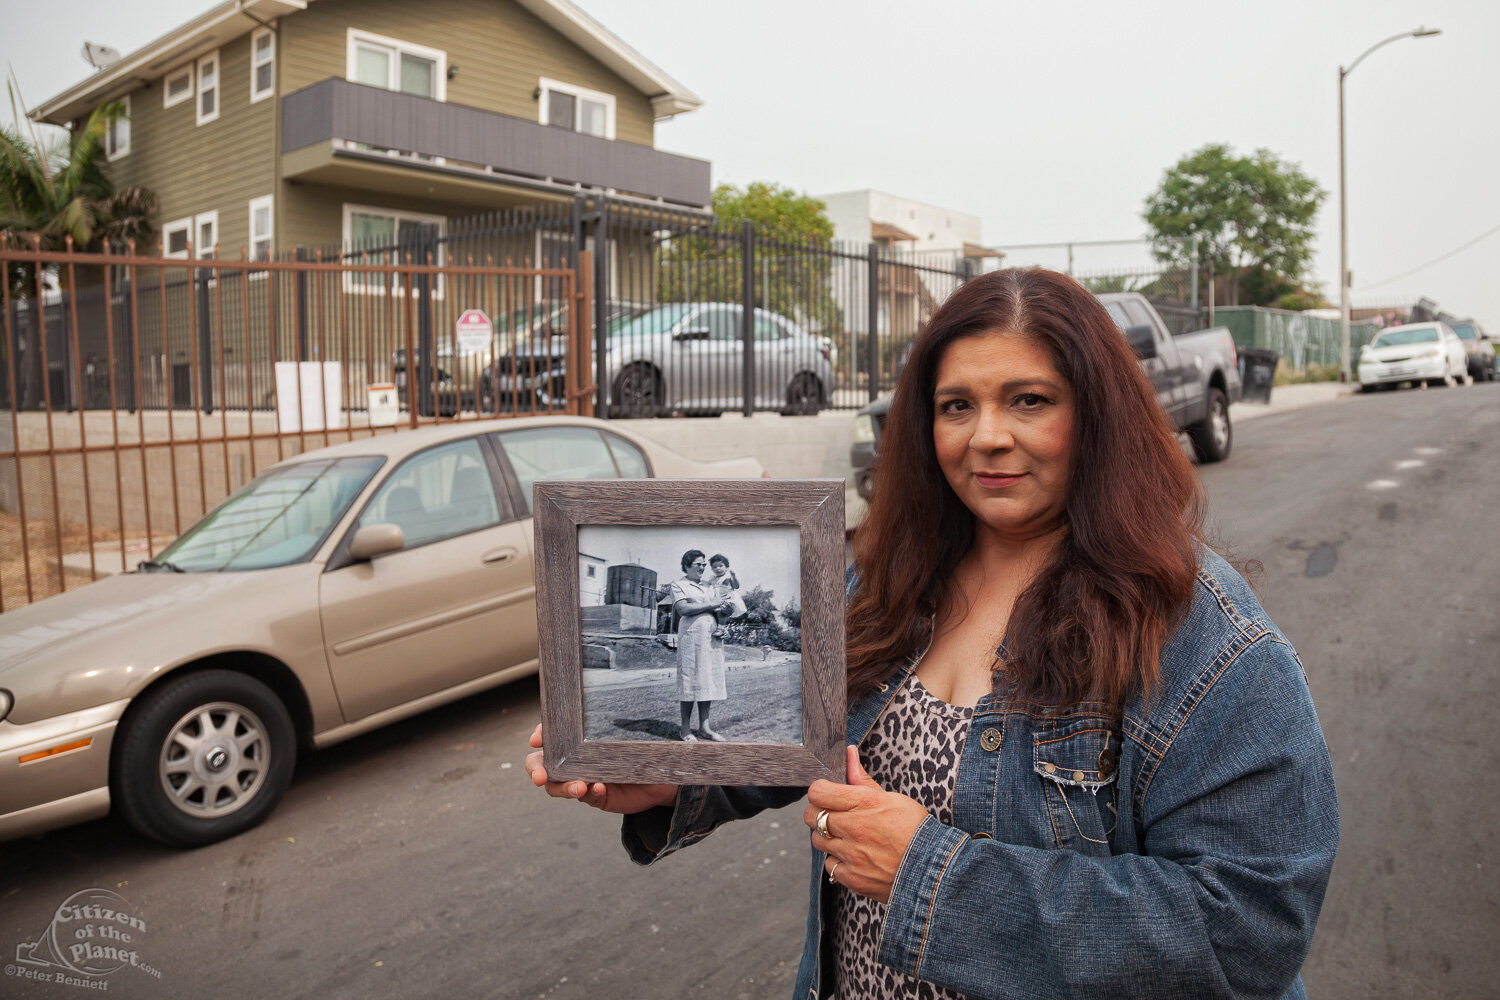  Lifelong resident and neighborhood activist, Rosalinda Morales stands on Firmin Street in the same location as a photo from 1958 of her aunt holding her in front of an oil tank. Dozens of abandoned wells still lie under homes and below ground along 